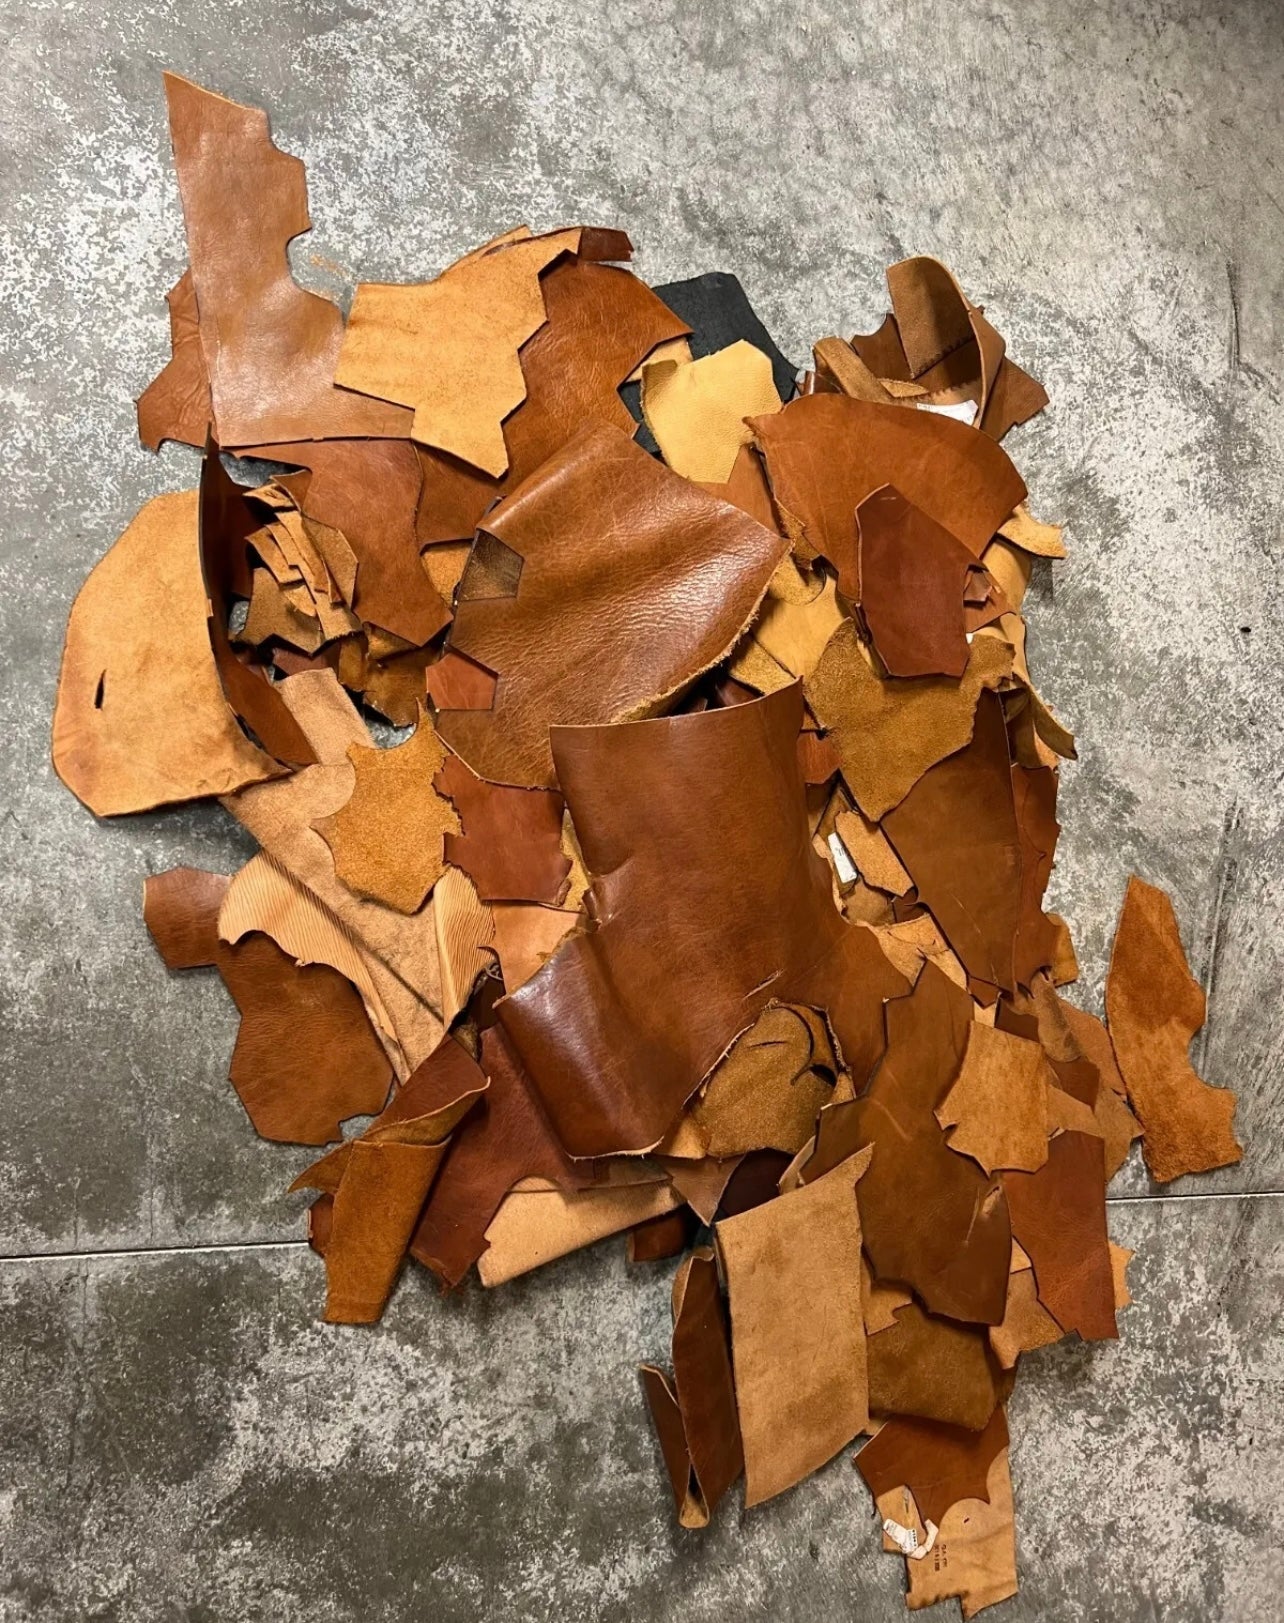 1lb and Up - Vegetable Tanned Leather Remnants - Lotus Leather